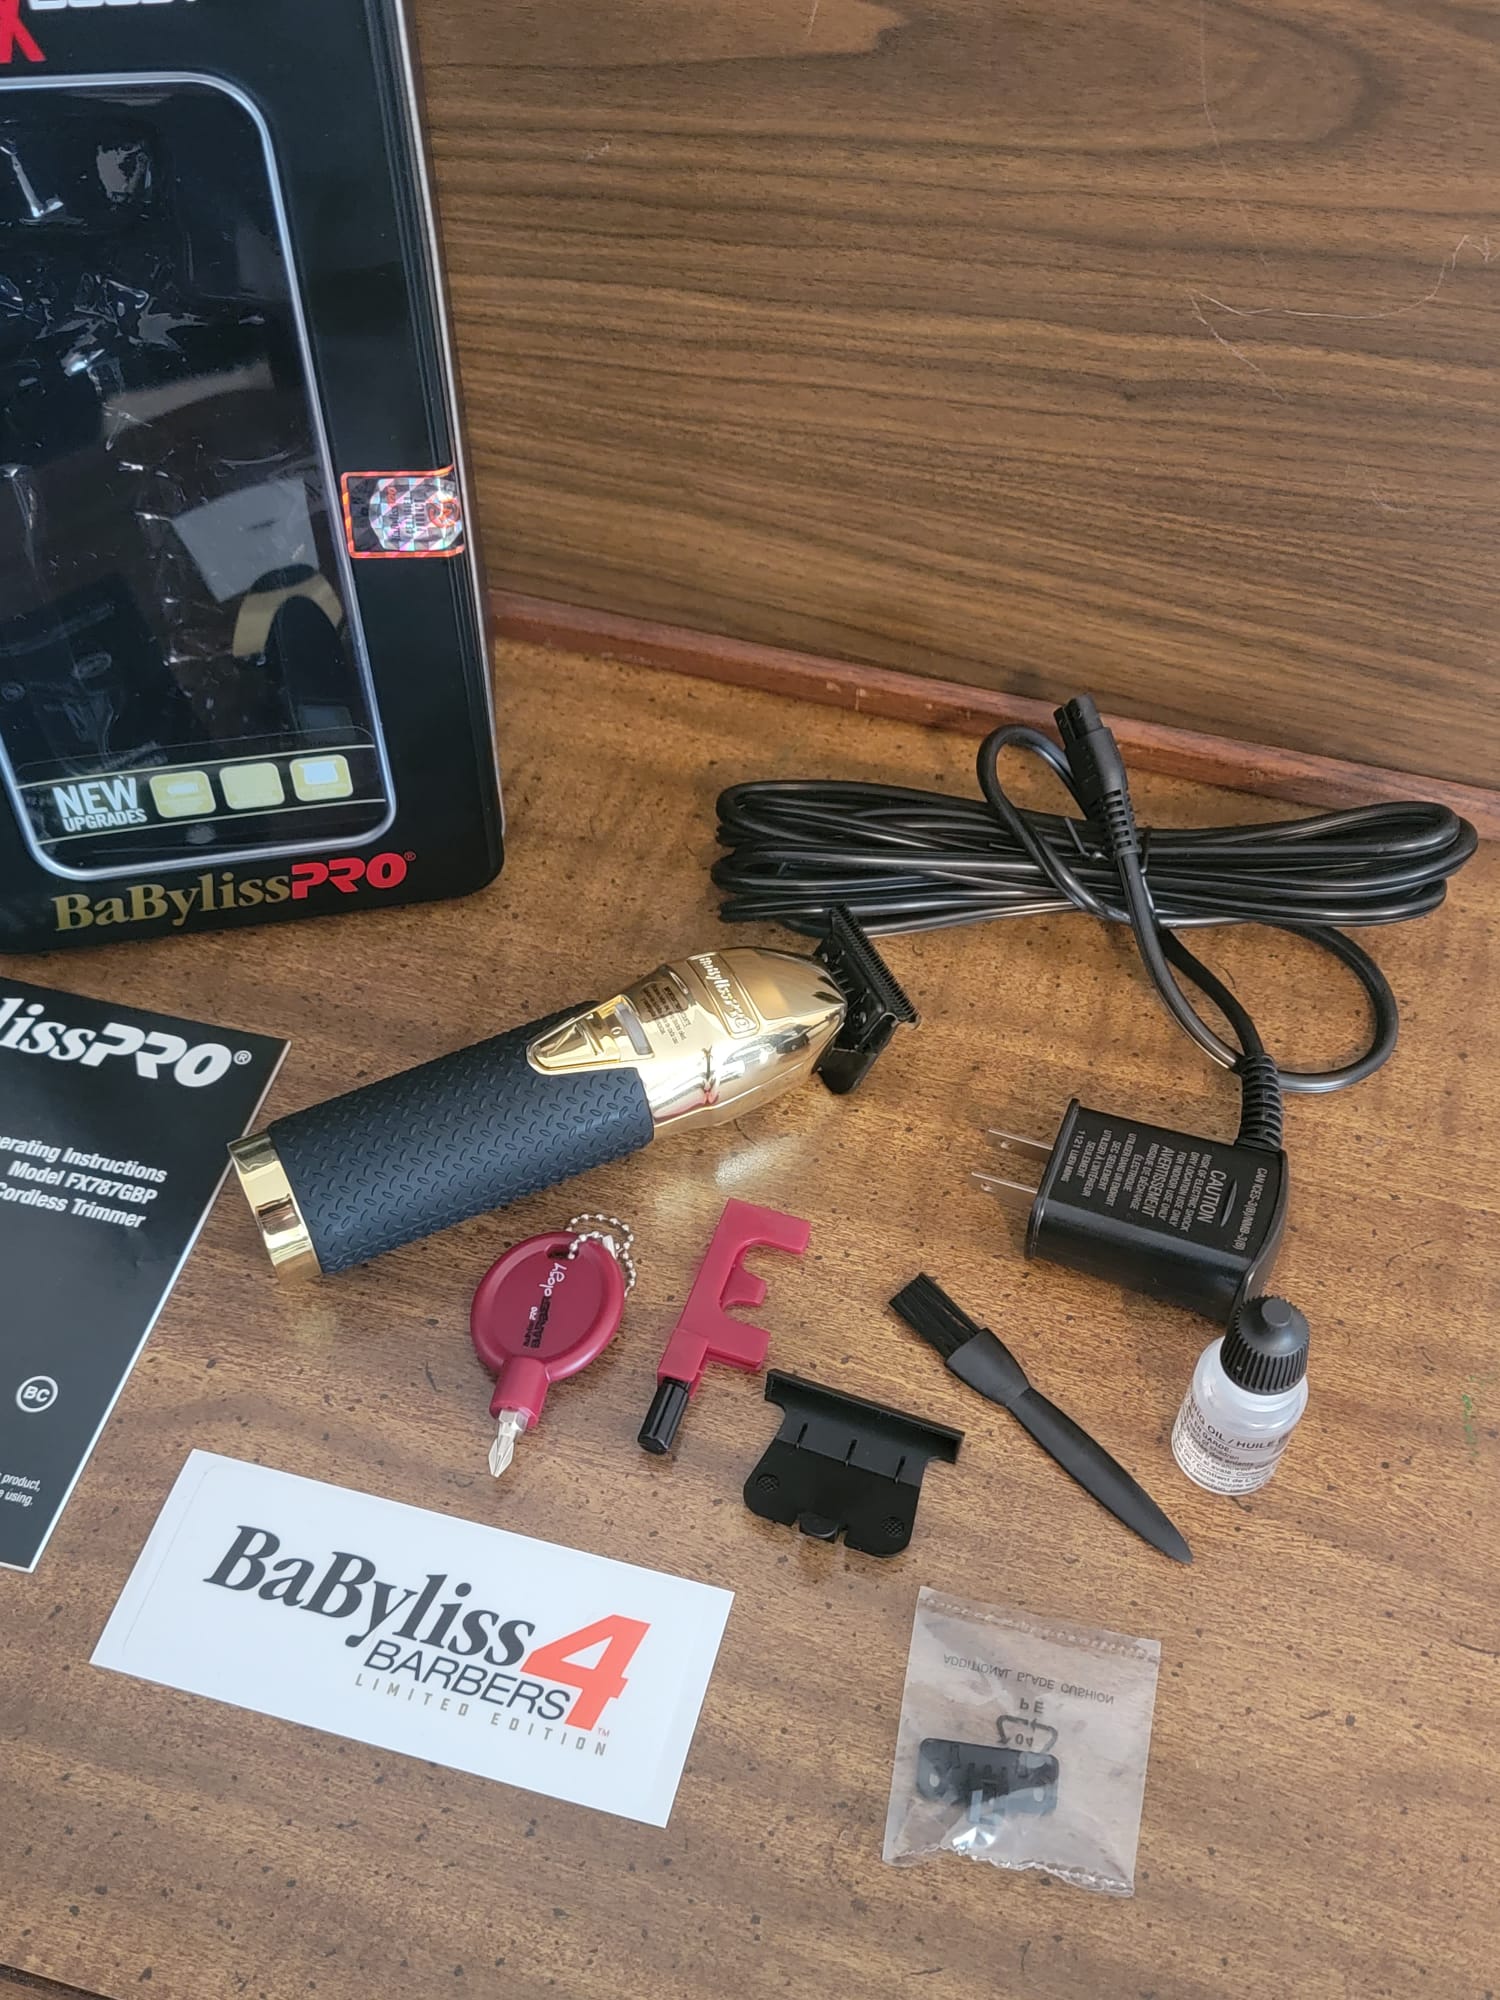 Babyliss+Pro+MetalFX+Series+Clipper+and+Trimmer+Set+-+Gold for sale online